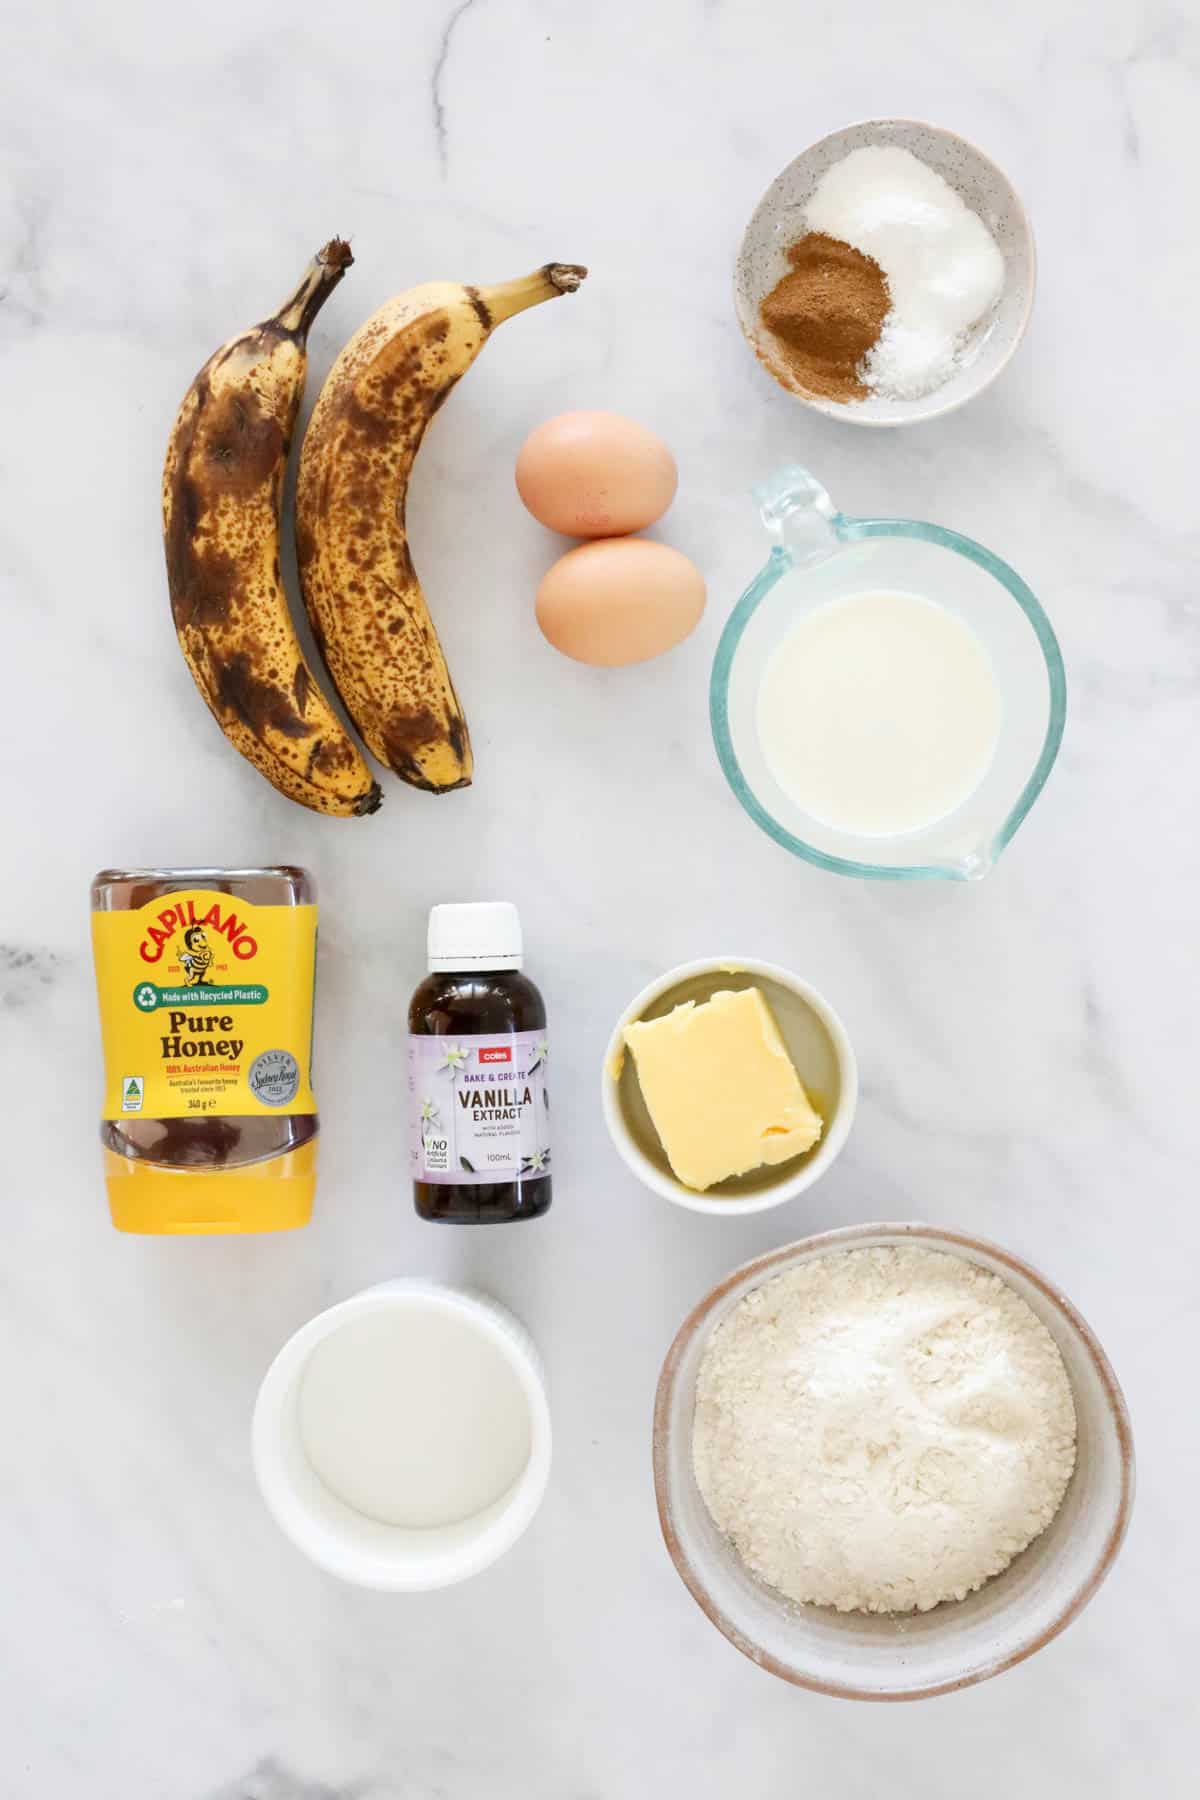 The ingredients for Thermomix banana muffins.